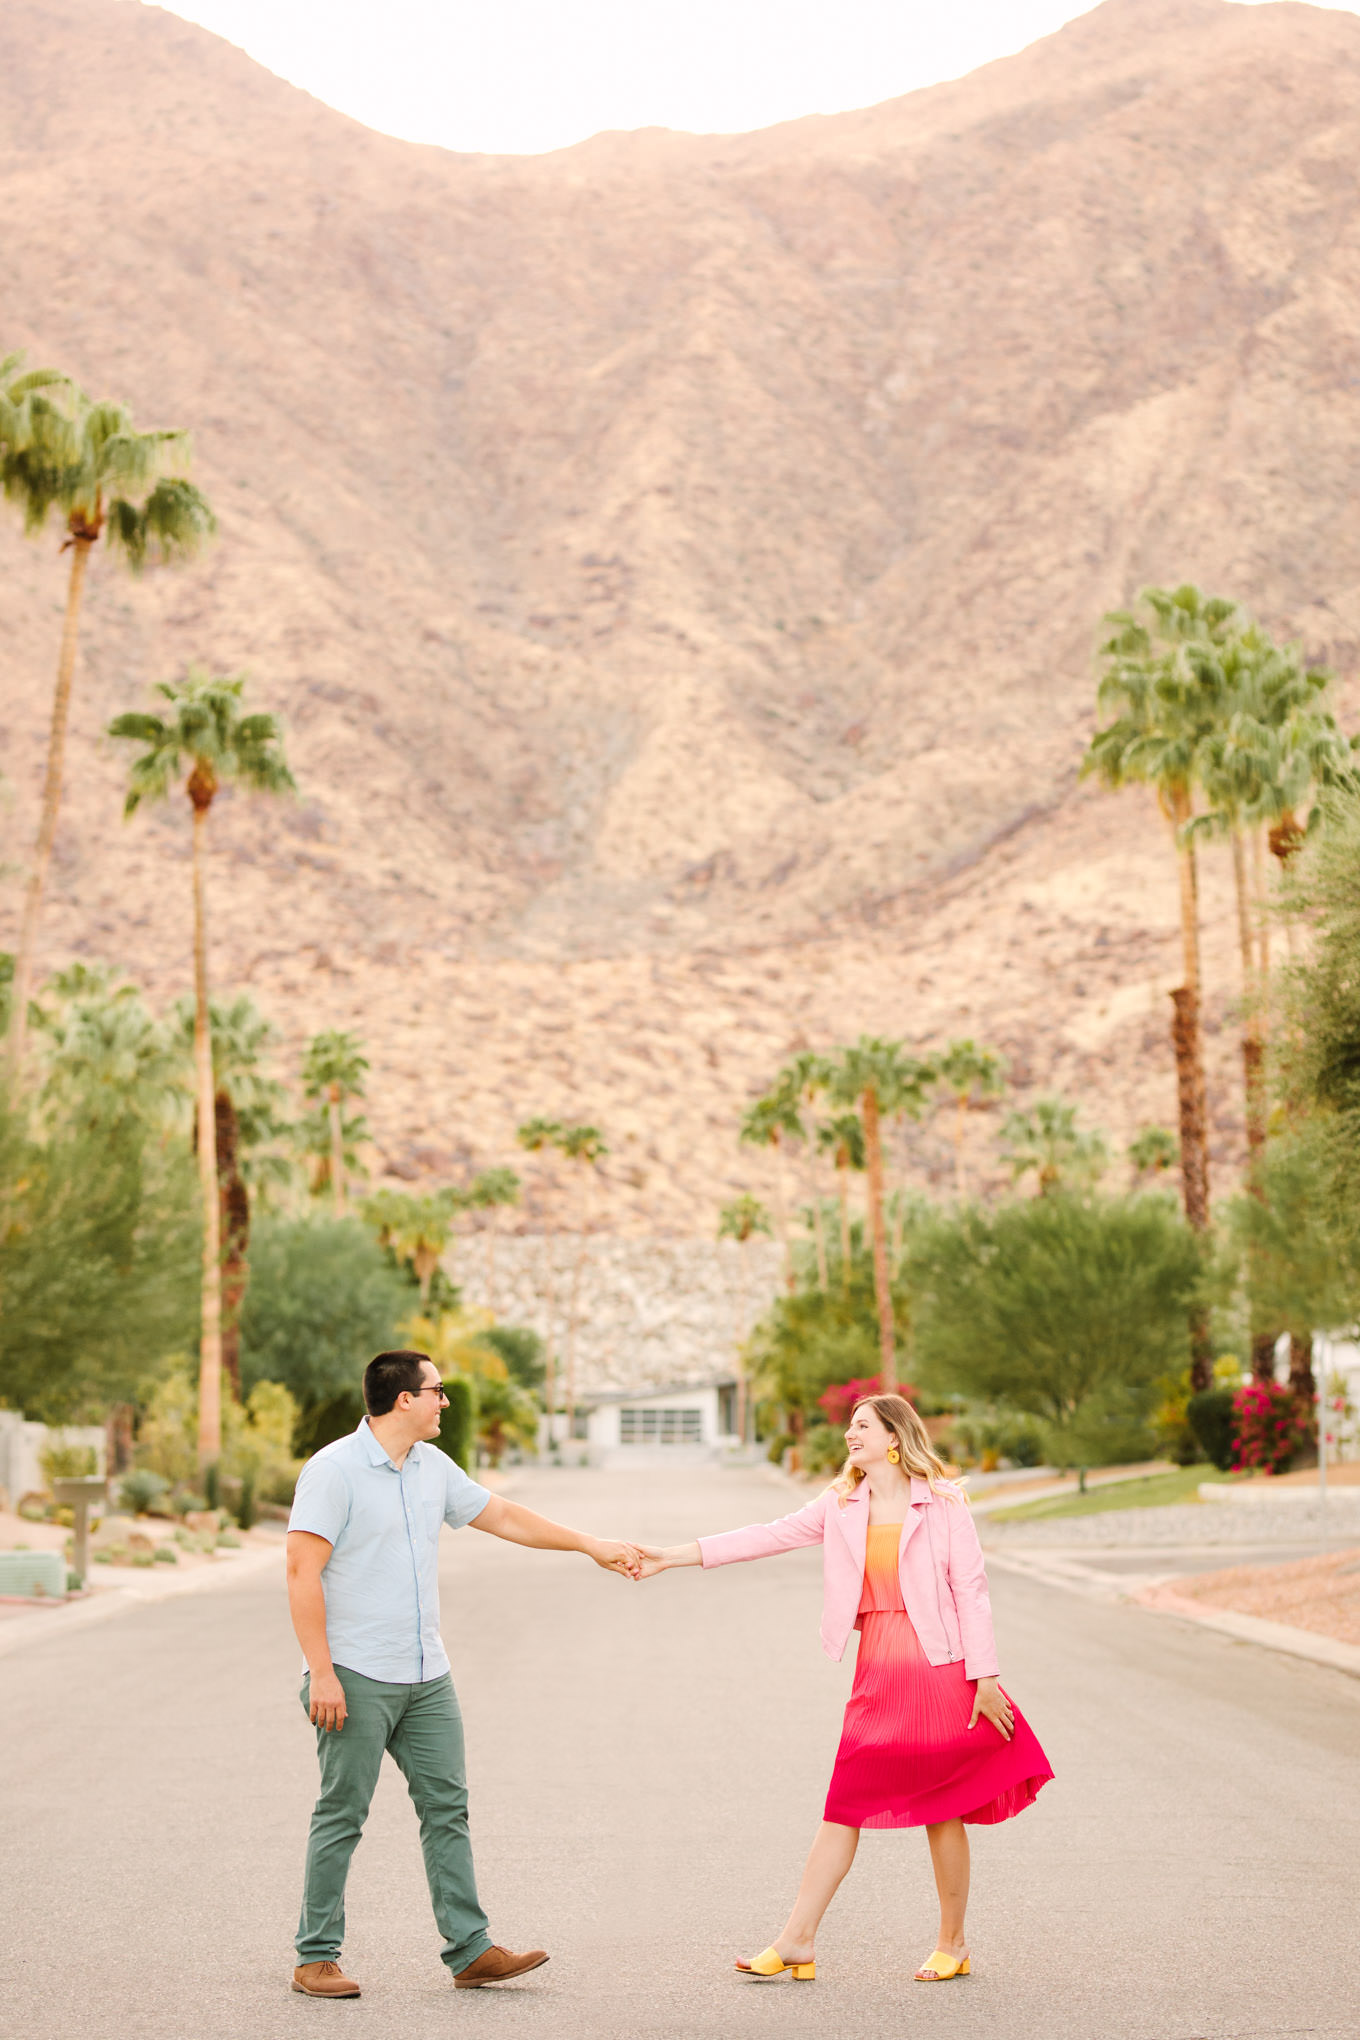 Palm Springs neighborhood engagement session | Engagement, elopement, and wedding photography roundup of Mary Costa’s favorite images from 2020 | Colorful and elevated photography for fun-loving couples in Southern California | #2020wedding #elopement #weddingphoto #weddingphotography #microwedding   Source: Mary Costa Photography | Los Angeles